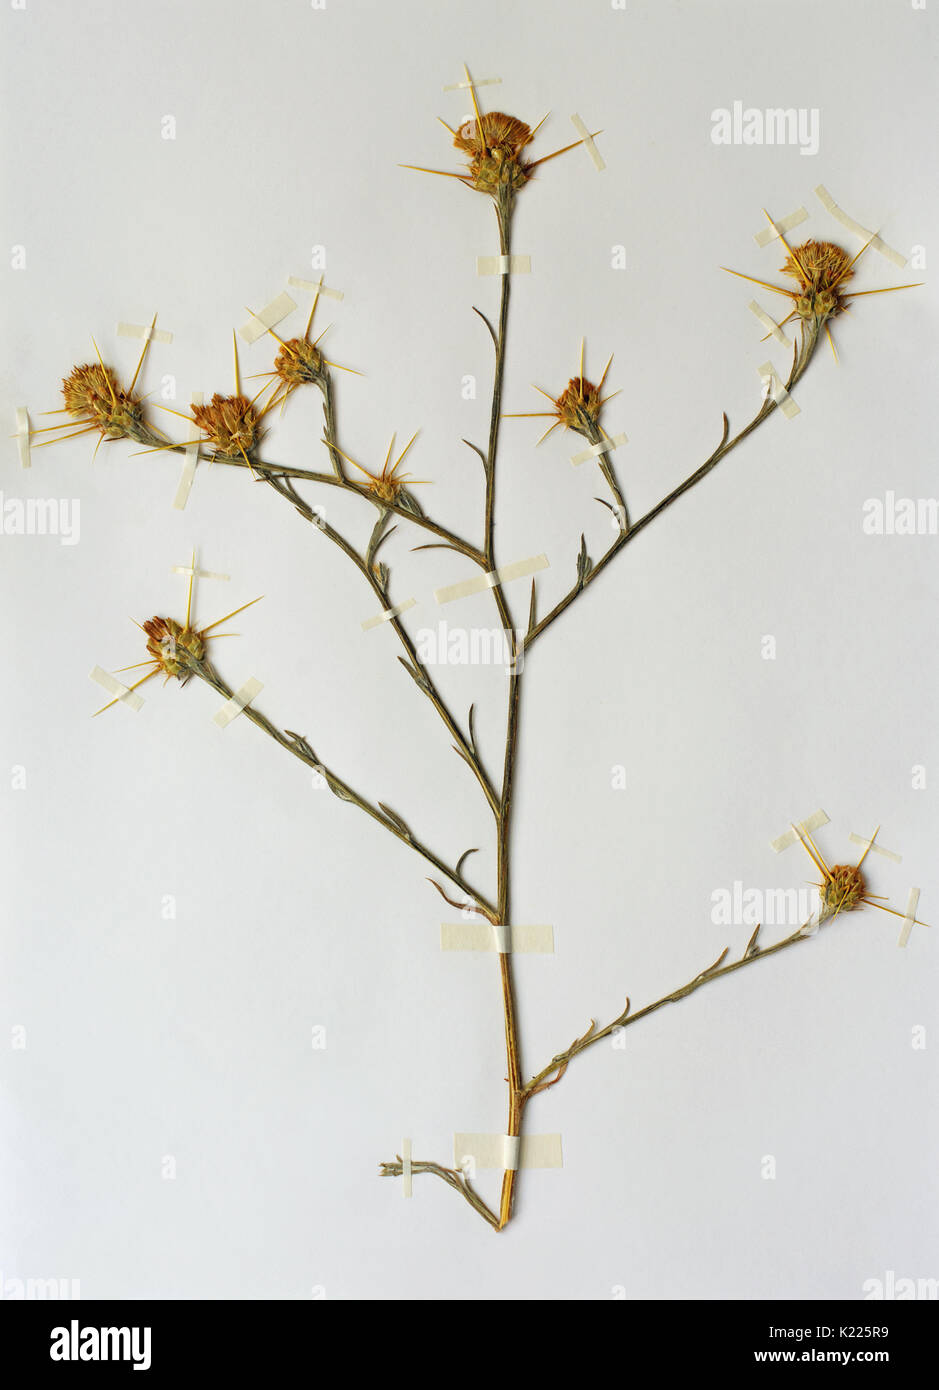 a herbarium sheet with Centaure solstitialis, the Yellow star-thistle or Golden starthistle, from the family Asteraceae; native to the Mediterranean r Stock Photo